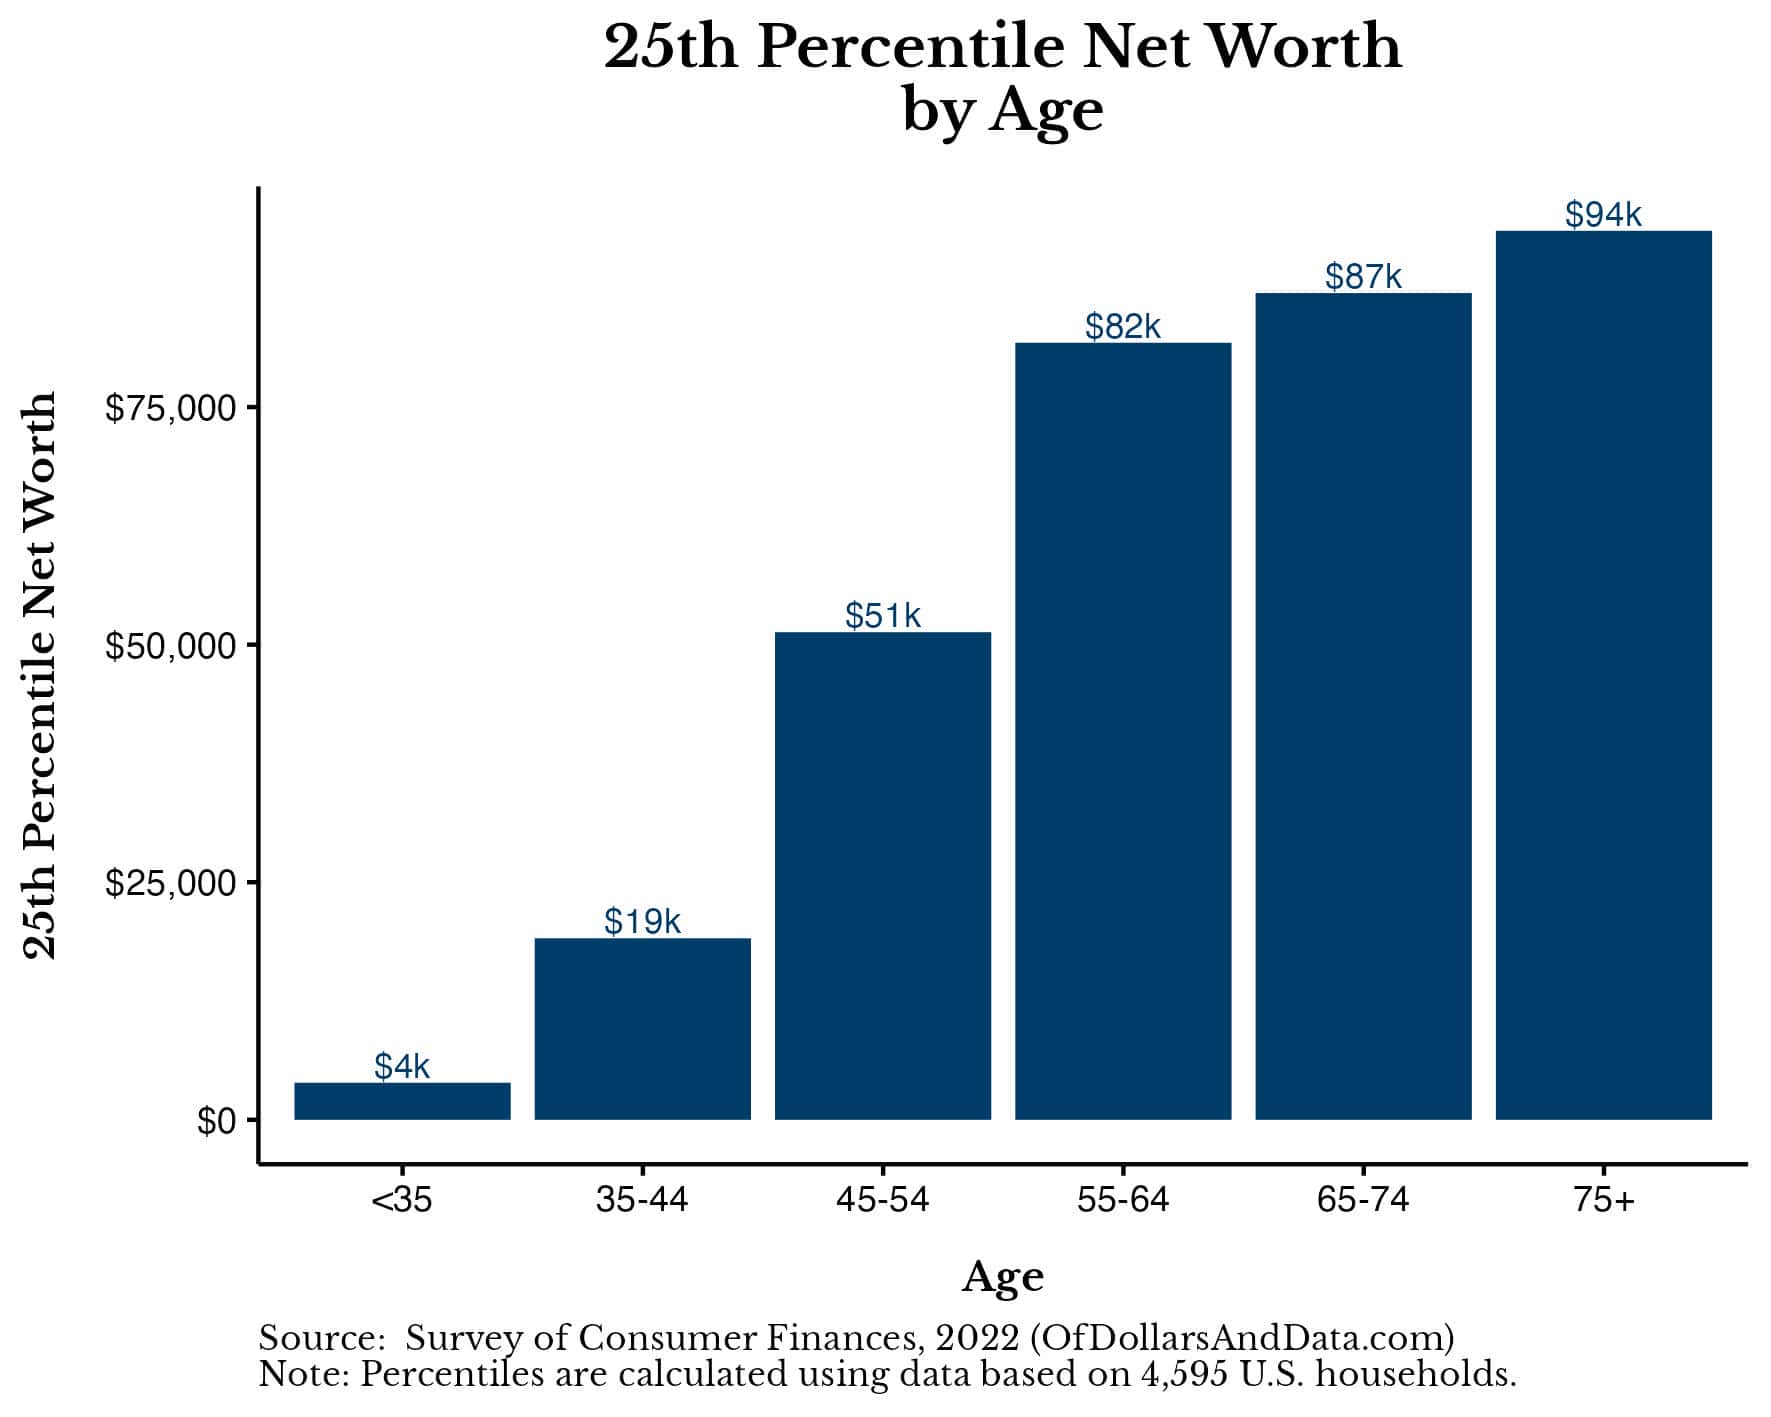 Chart showing the 25th percentile net worth by age in the Survey of Consumer Finances 2022 data from the Federal Reserve.